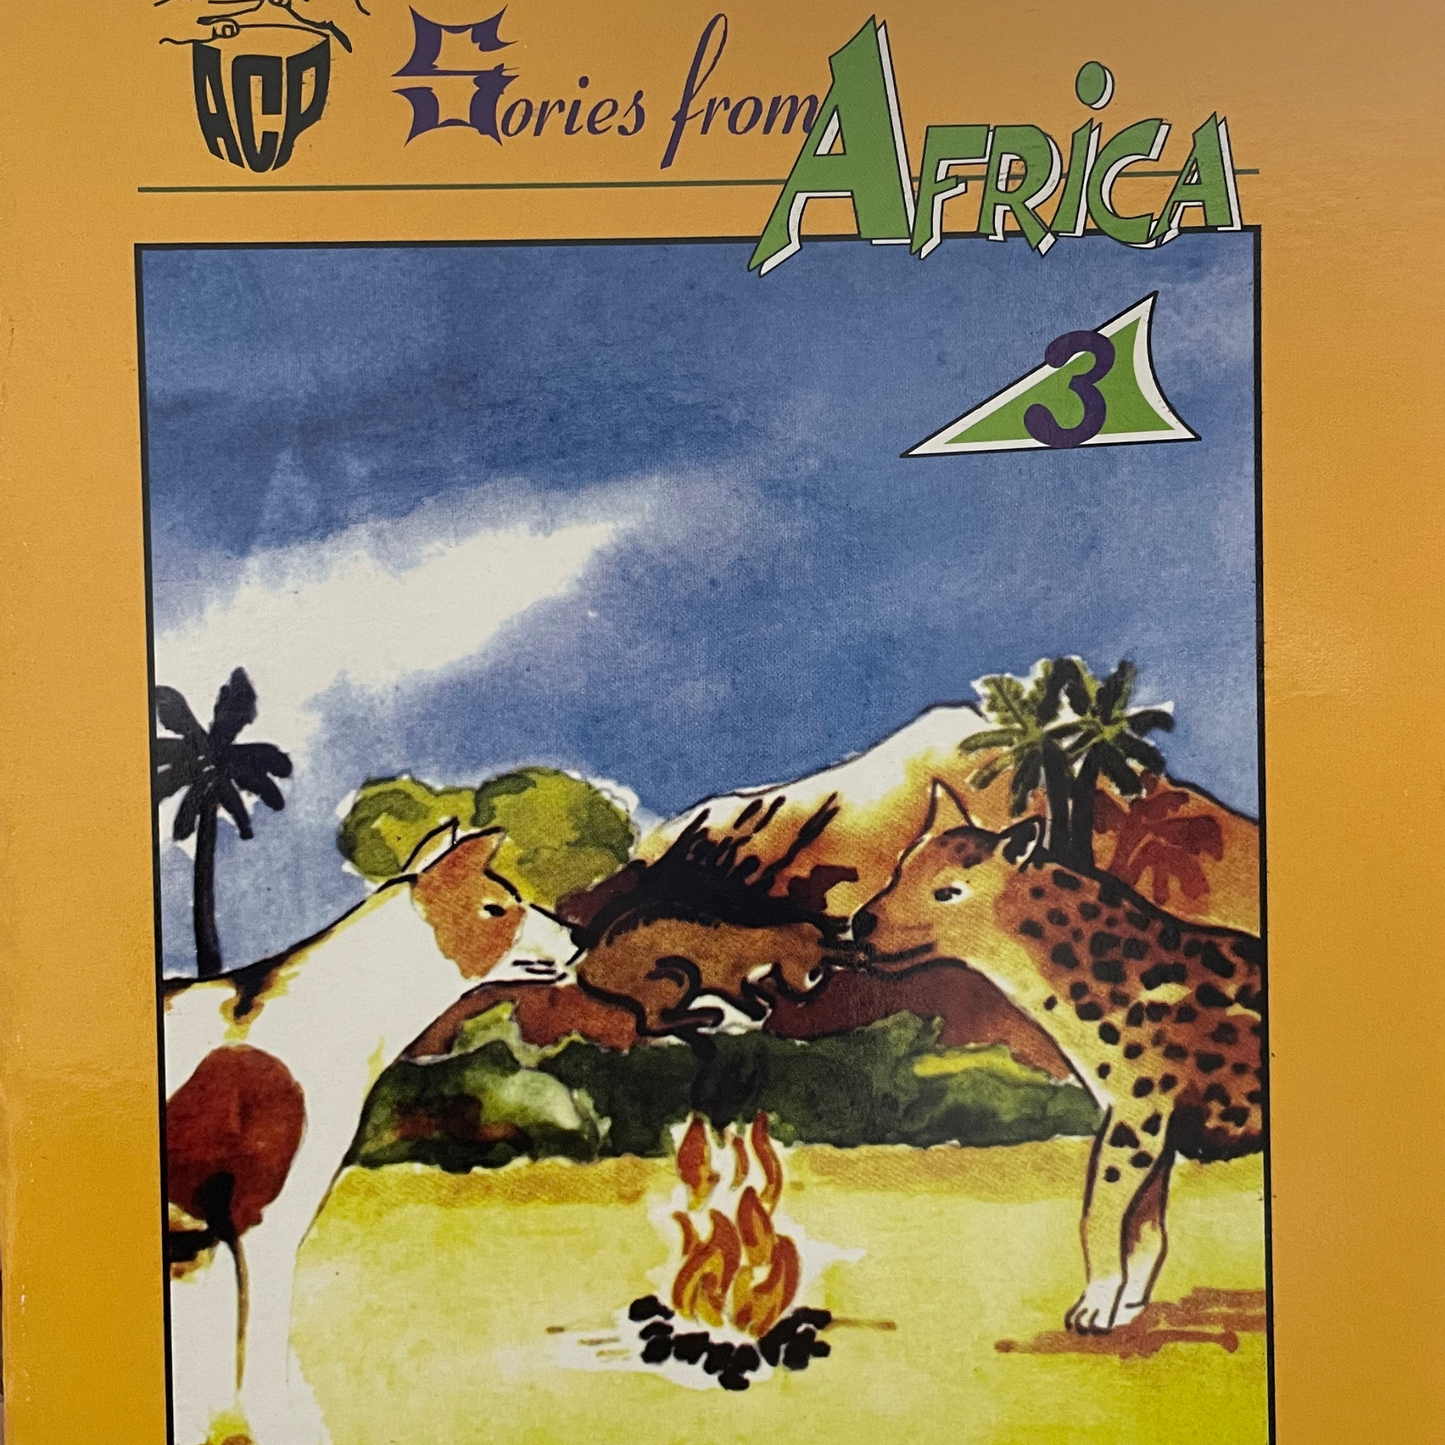 Stories from Africa Volume 3